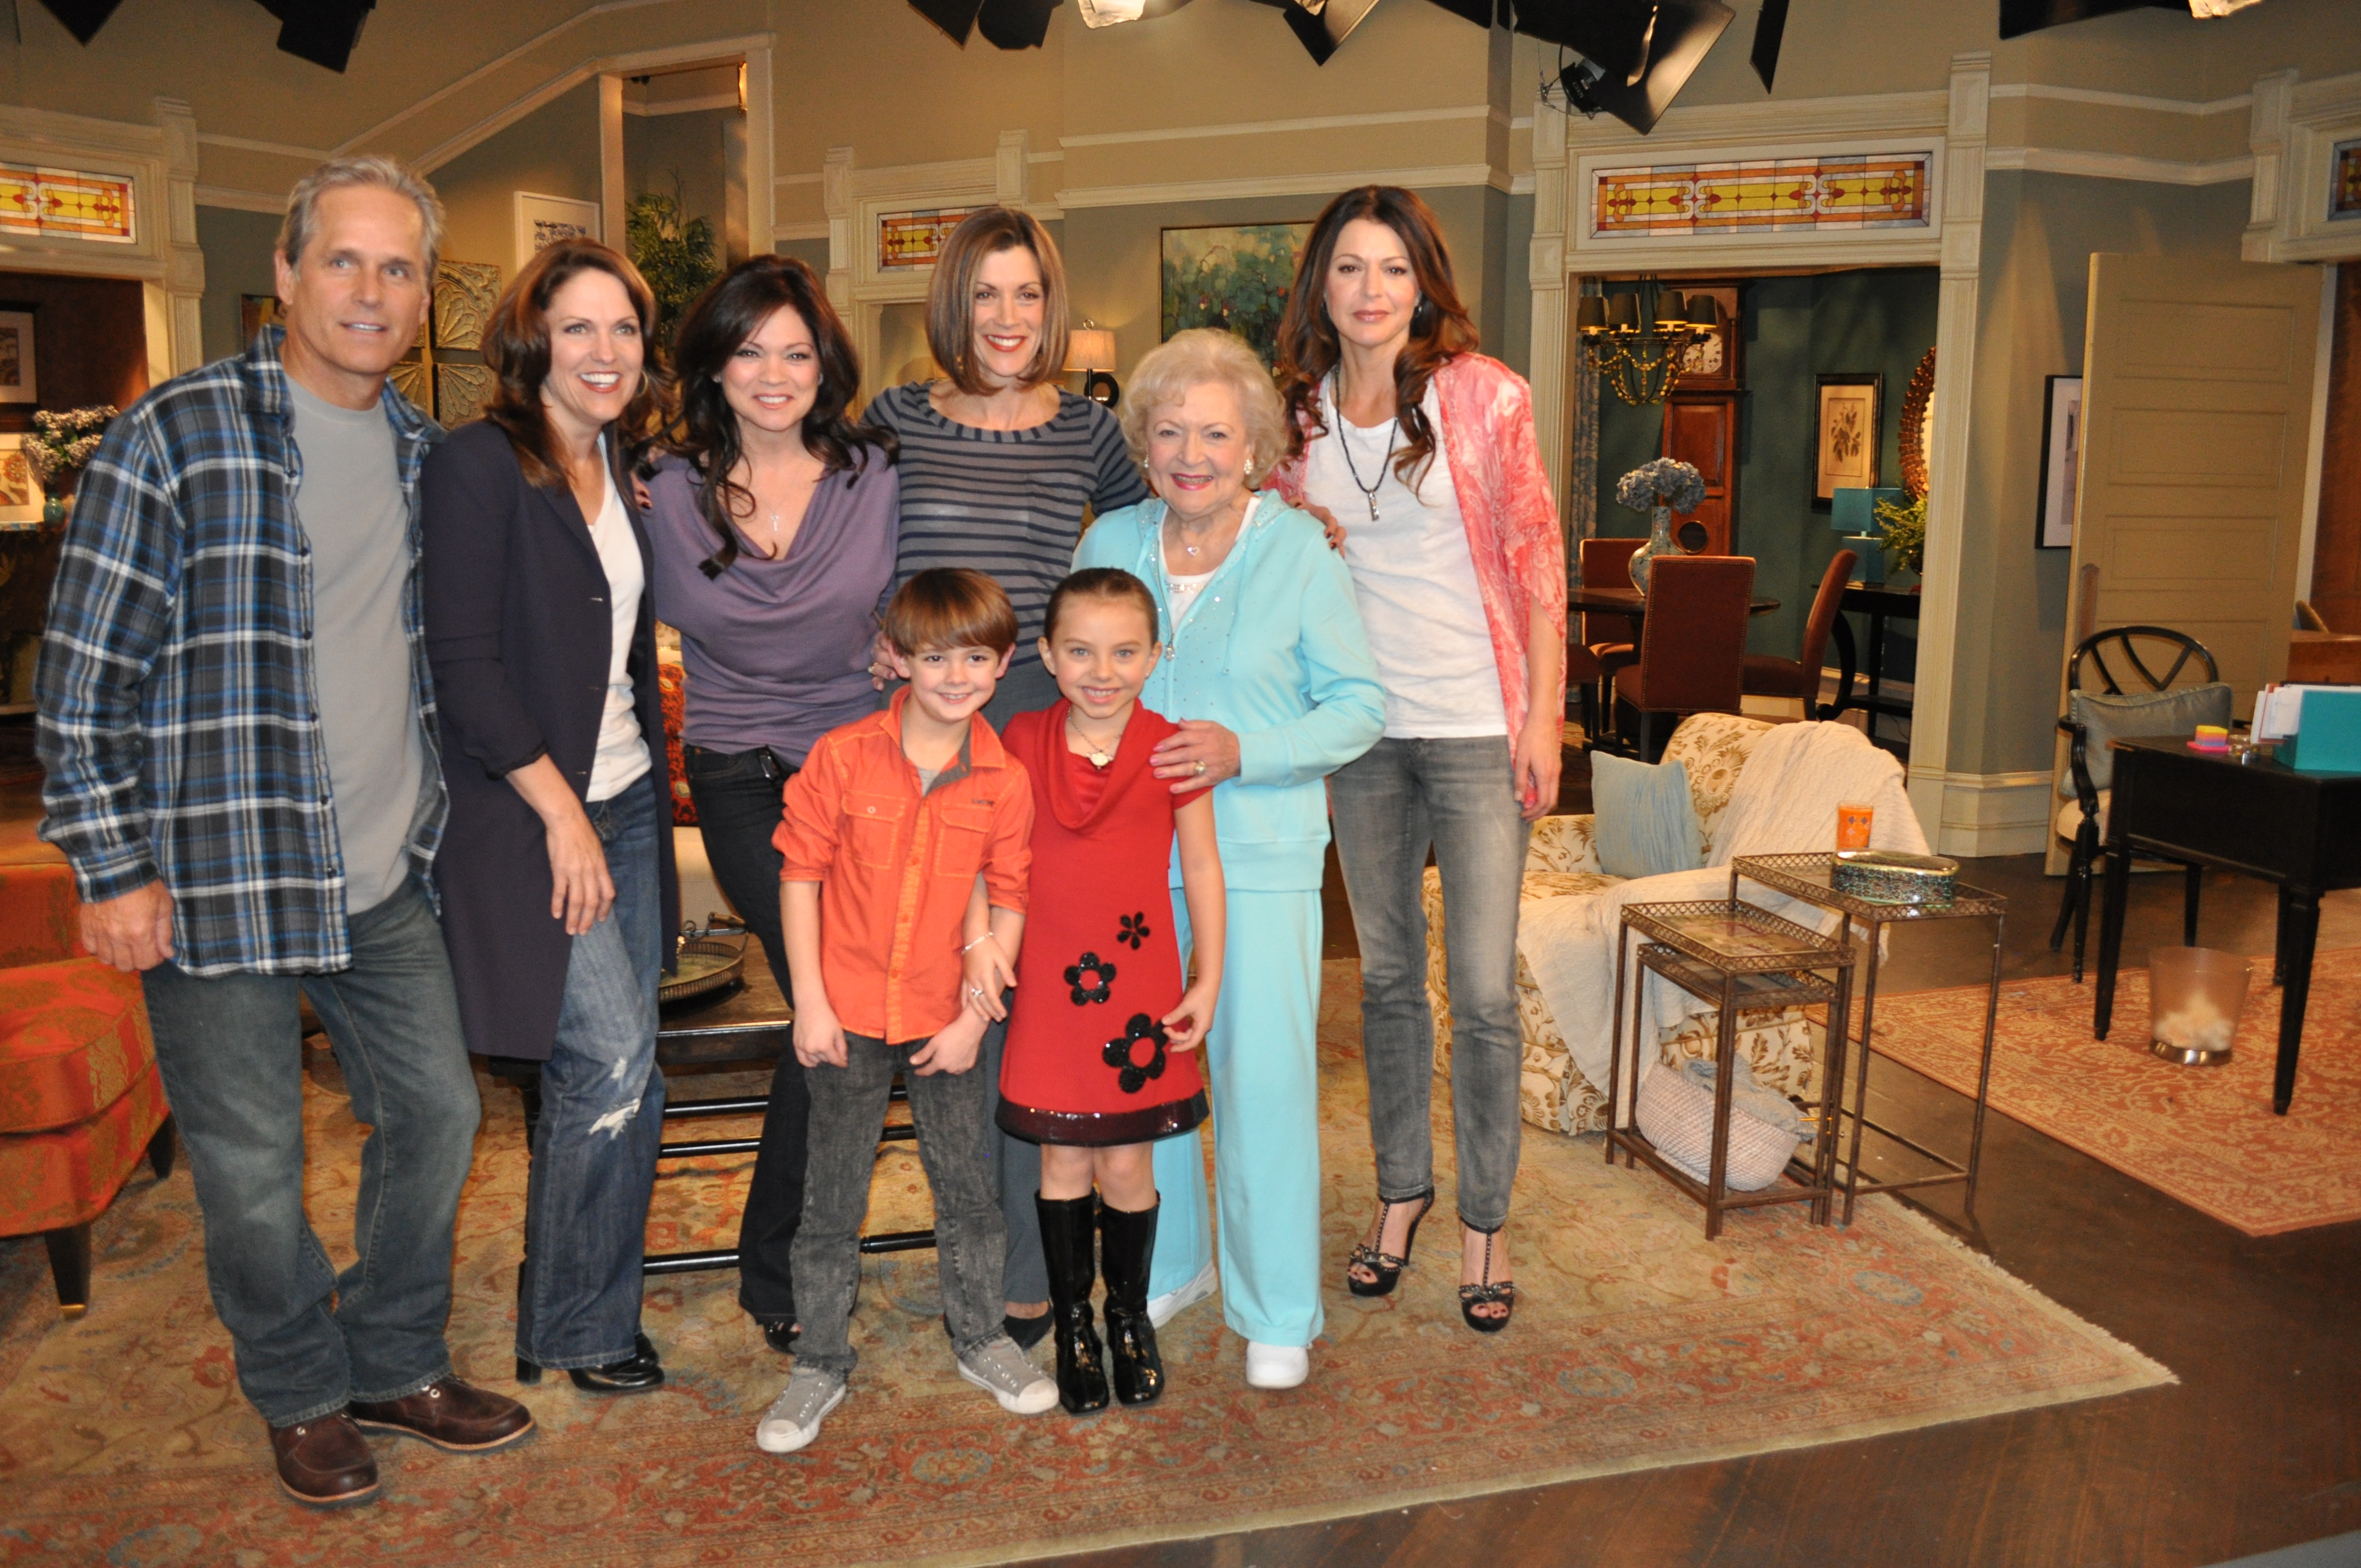 Hot In Cleveland Cast, Betty White, Valerie Bertinelli, Max Charles, Caitlin Charmichael, Jane Leeves,Wendie Malick, Gregory Harrison, Mandy June Turpan